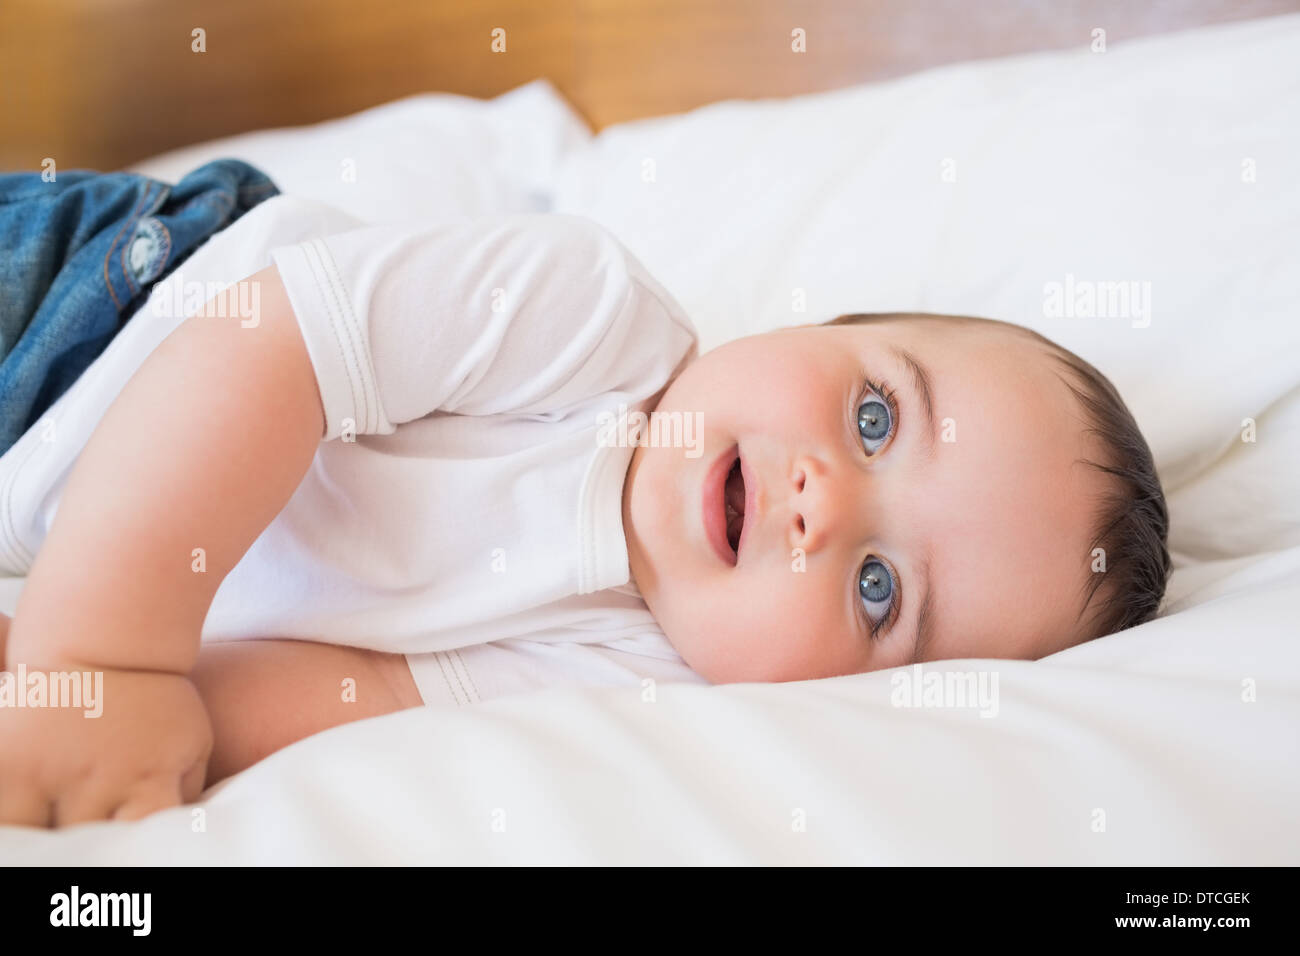 Baby lying in bed Stock Photo